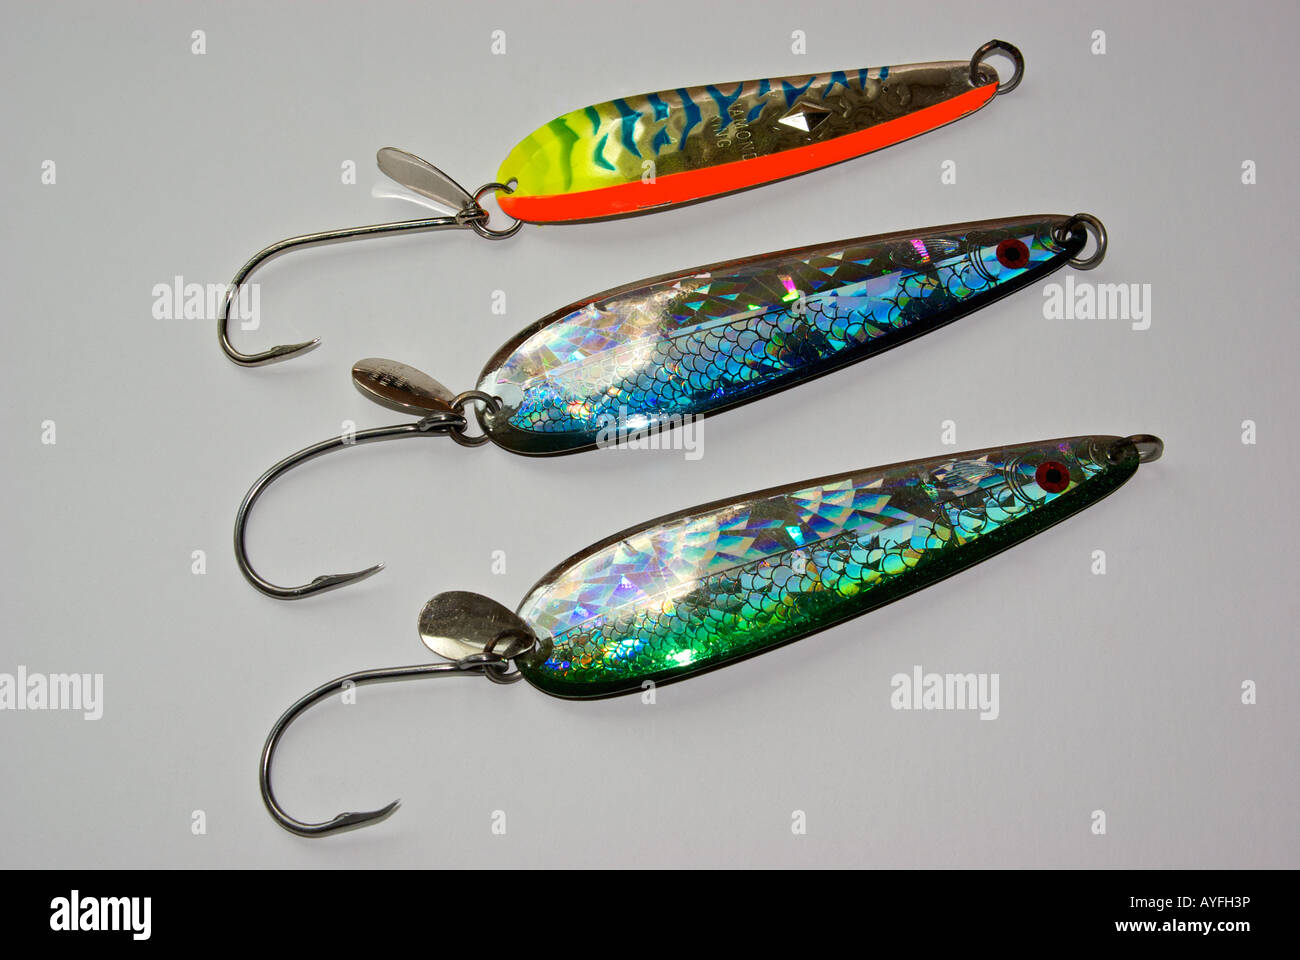 Luhr Jensen Diamond King and Coyote trolling spoons for salmon